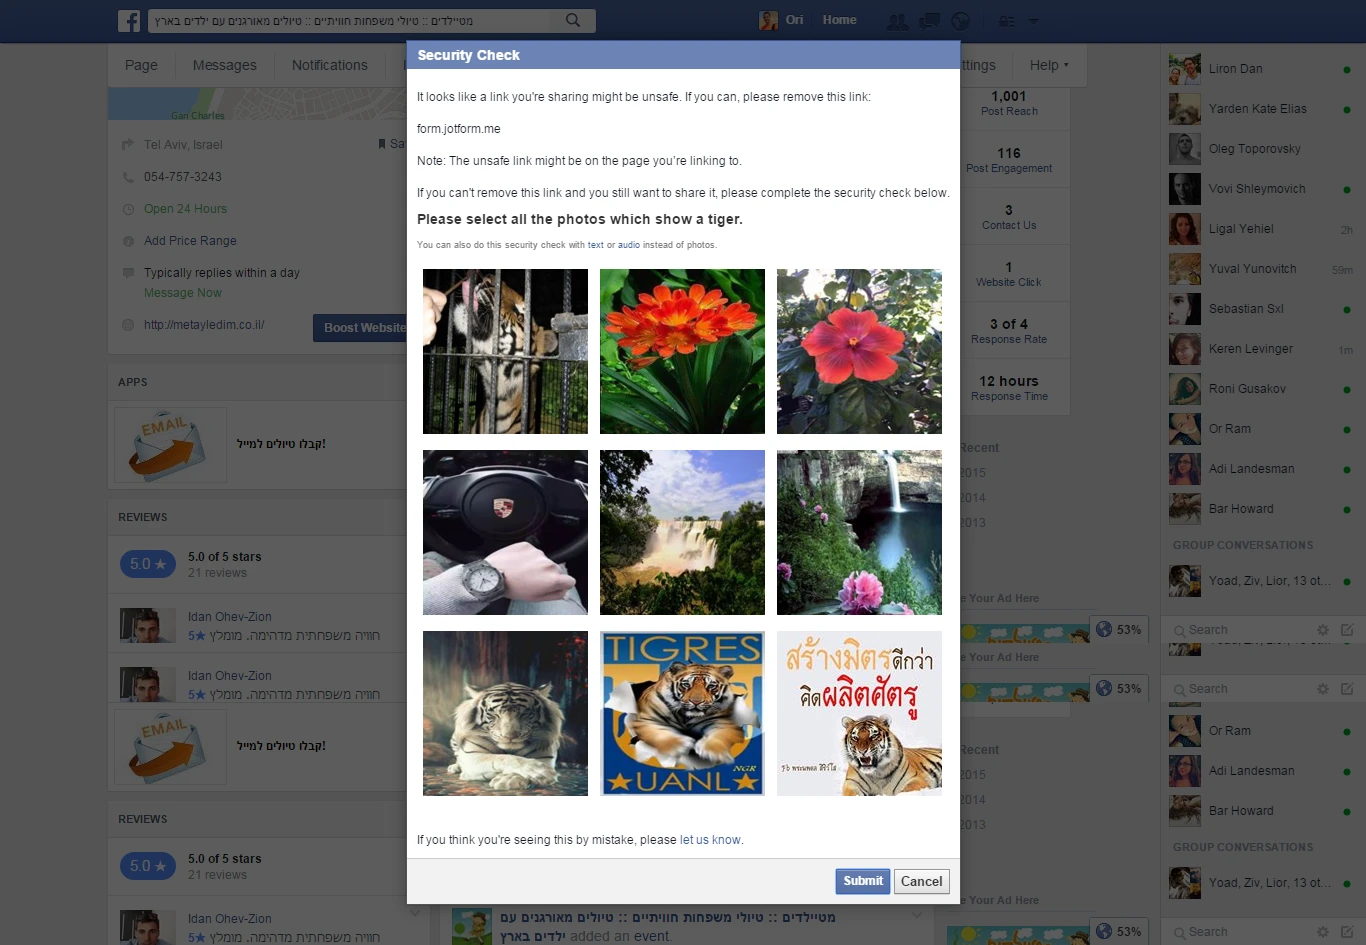 Annoying security check when trying to share a Jotform form in Facebook Image 1 Screenshot 20